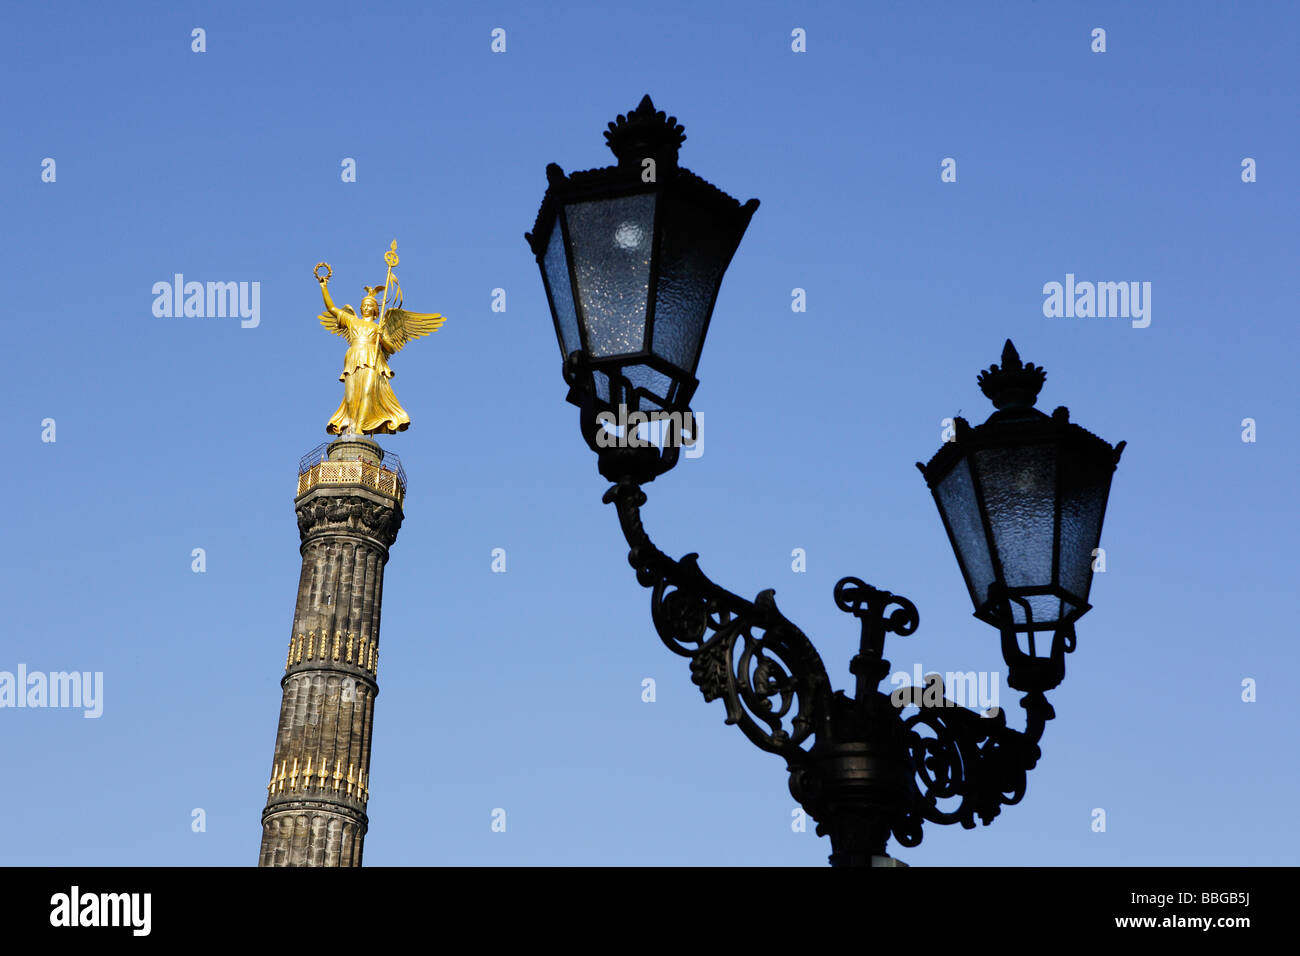 Street lantern and statue of Victoria on the Siegessaeule, Victory Column in Berlin, Germany, Europe Stock Photo